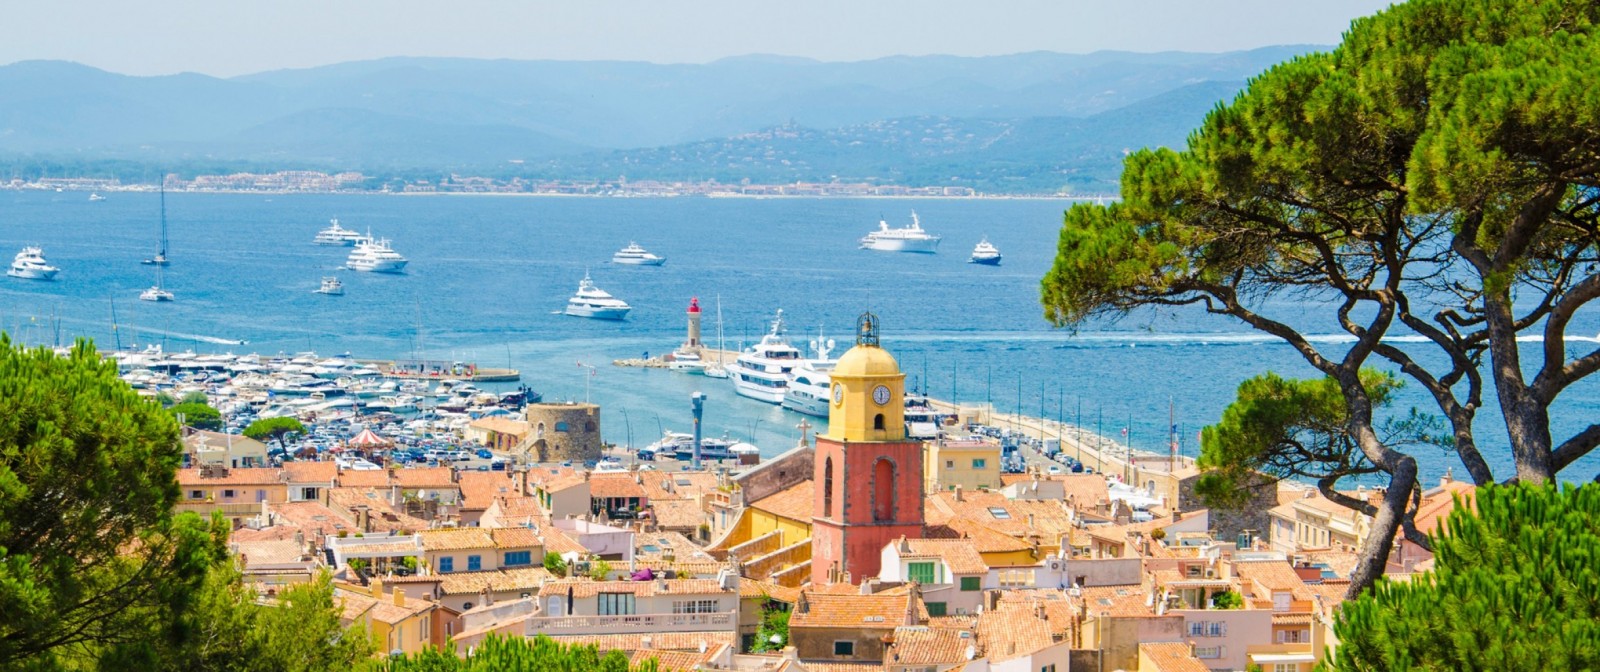 Private Chauffeur for Cannes Film Festival - Premium Vehicles & Services - Reactivity 24/7 - Ruby Services - Car Rental with Driver for Cannes Film Festival